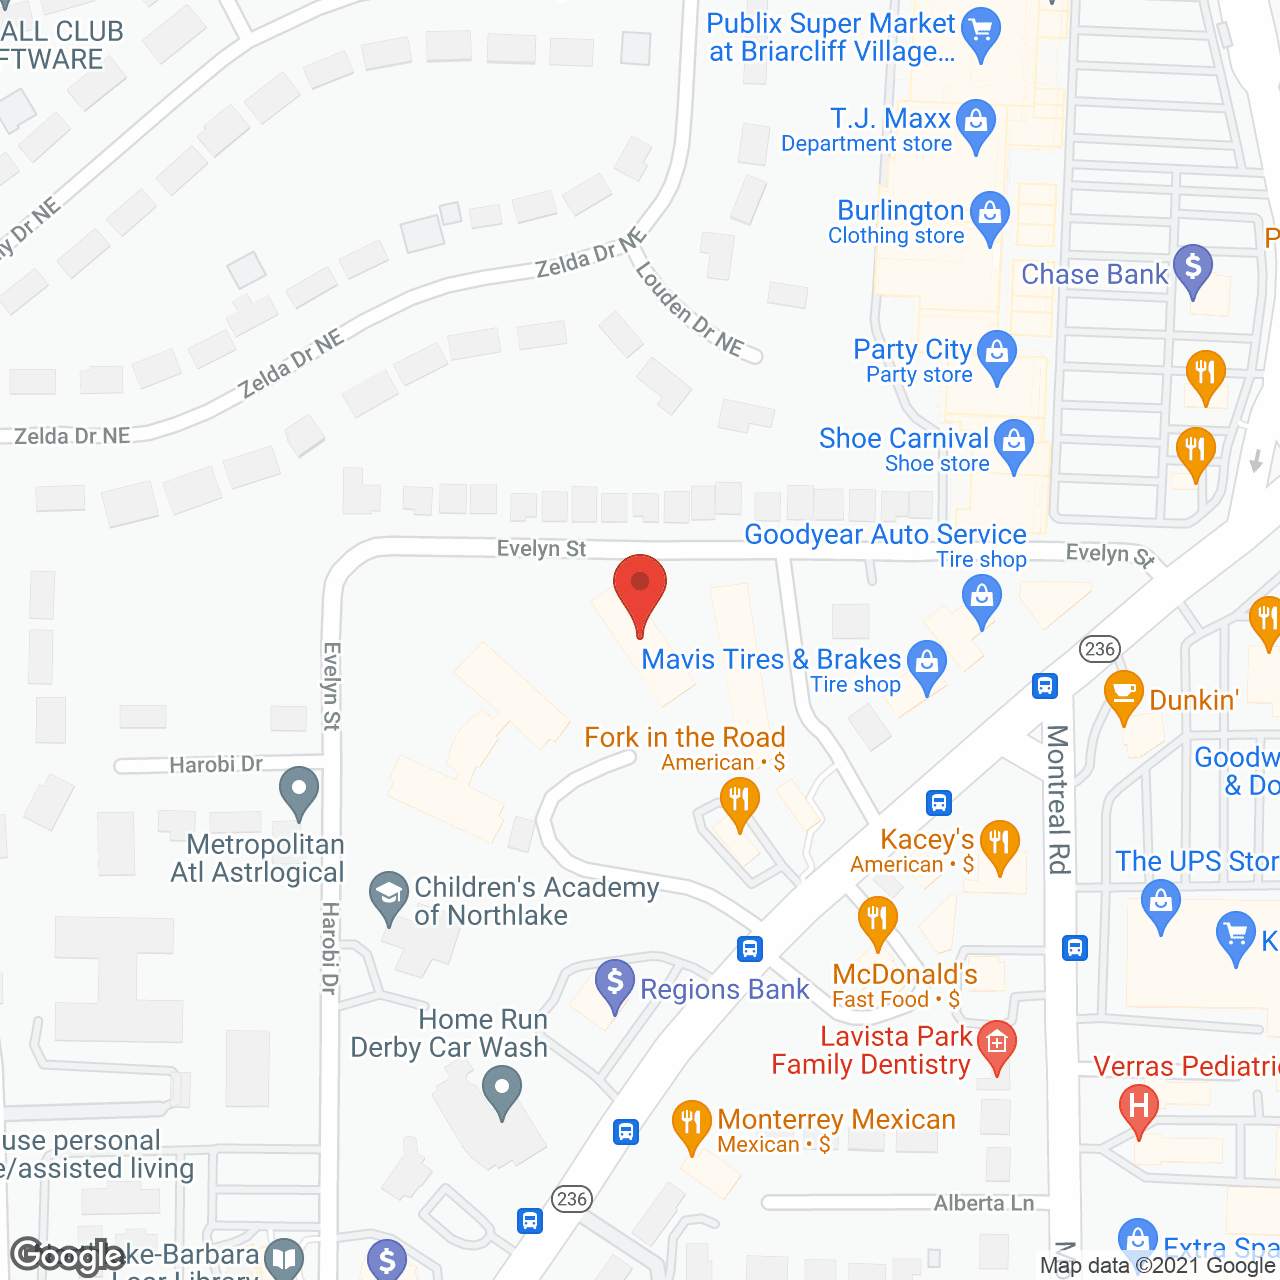 Bentley Square in google map